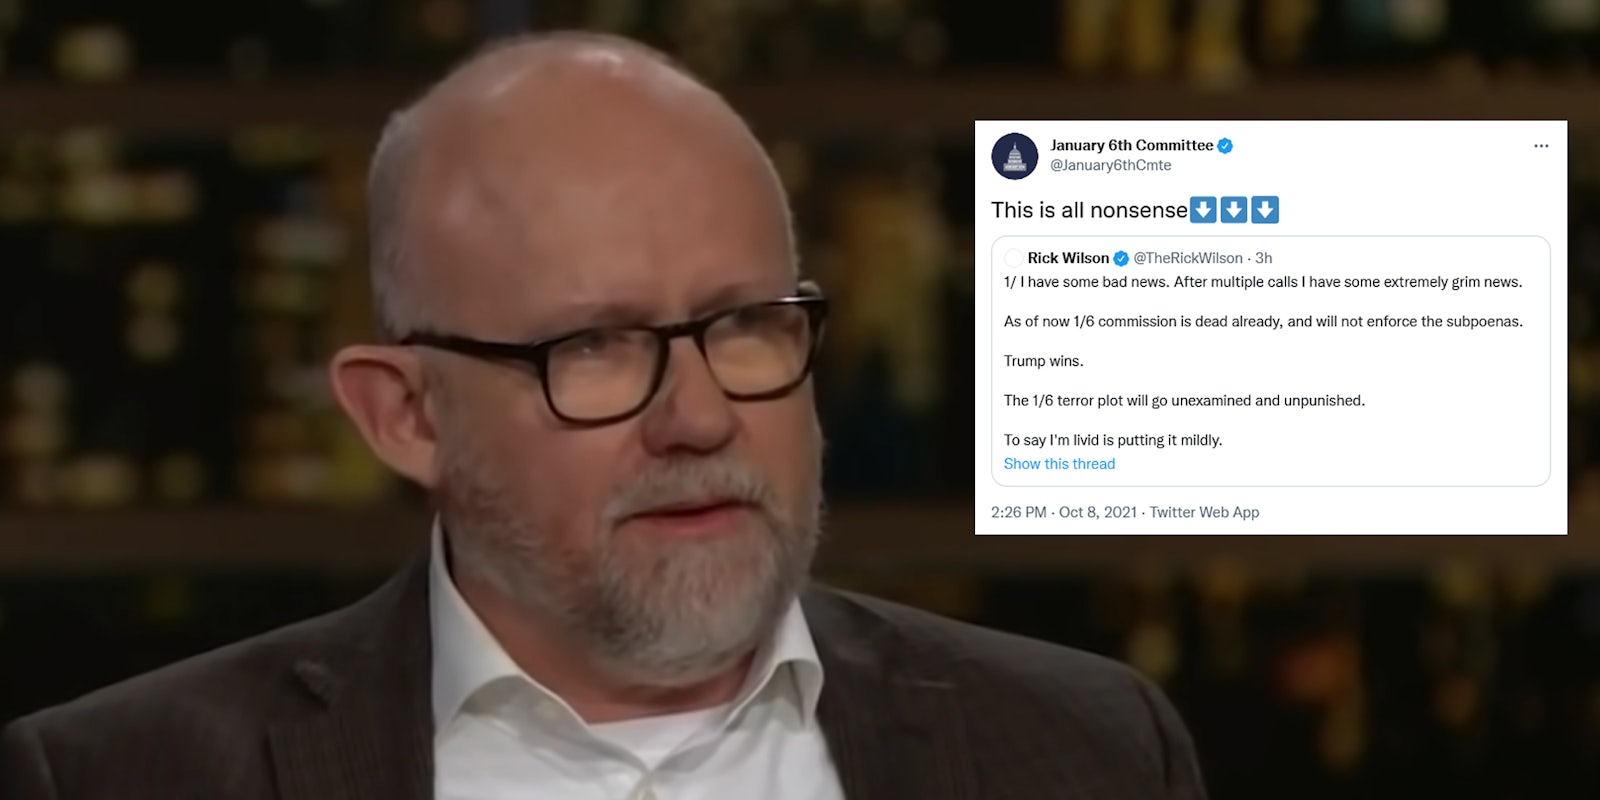 Rick Wilson next to a tweet from Jan. 6 Committee quoting him and saying 'this is all nonsense.'